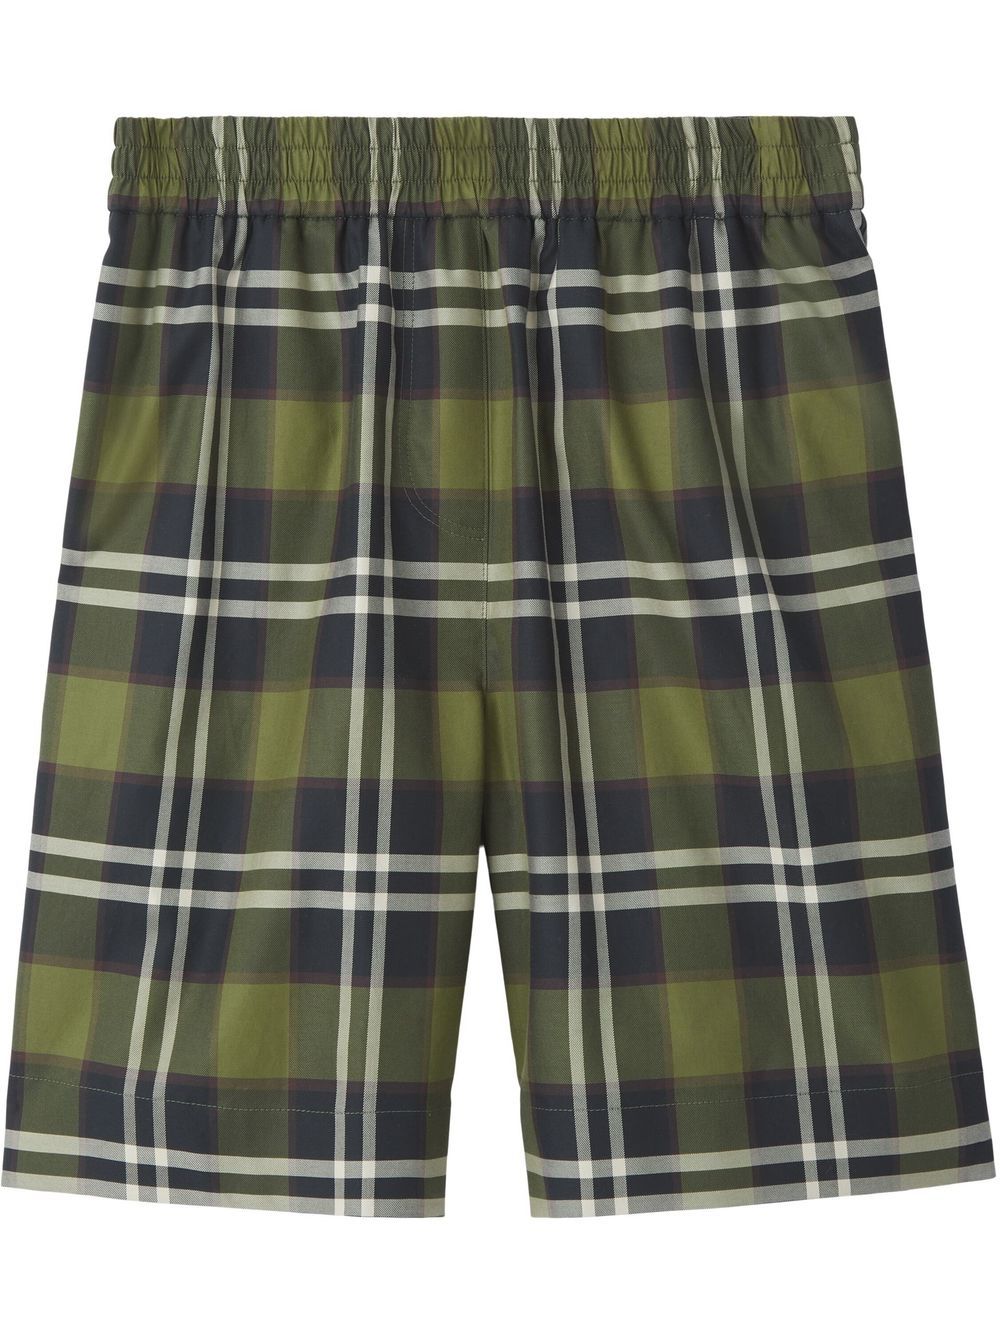 Burberry checked twill shorts - Green von Burberry